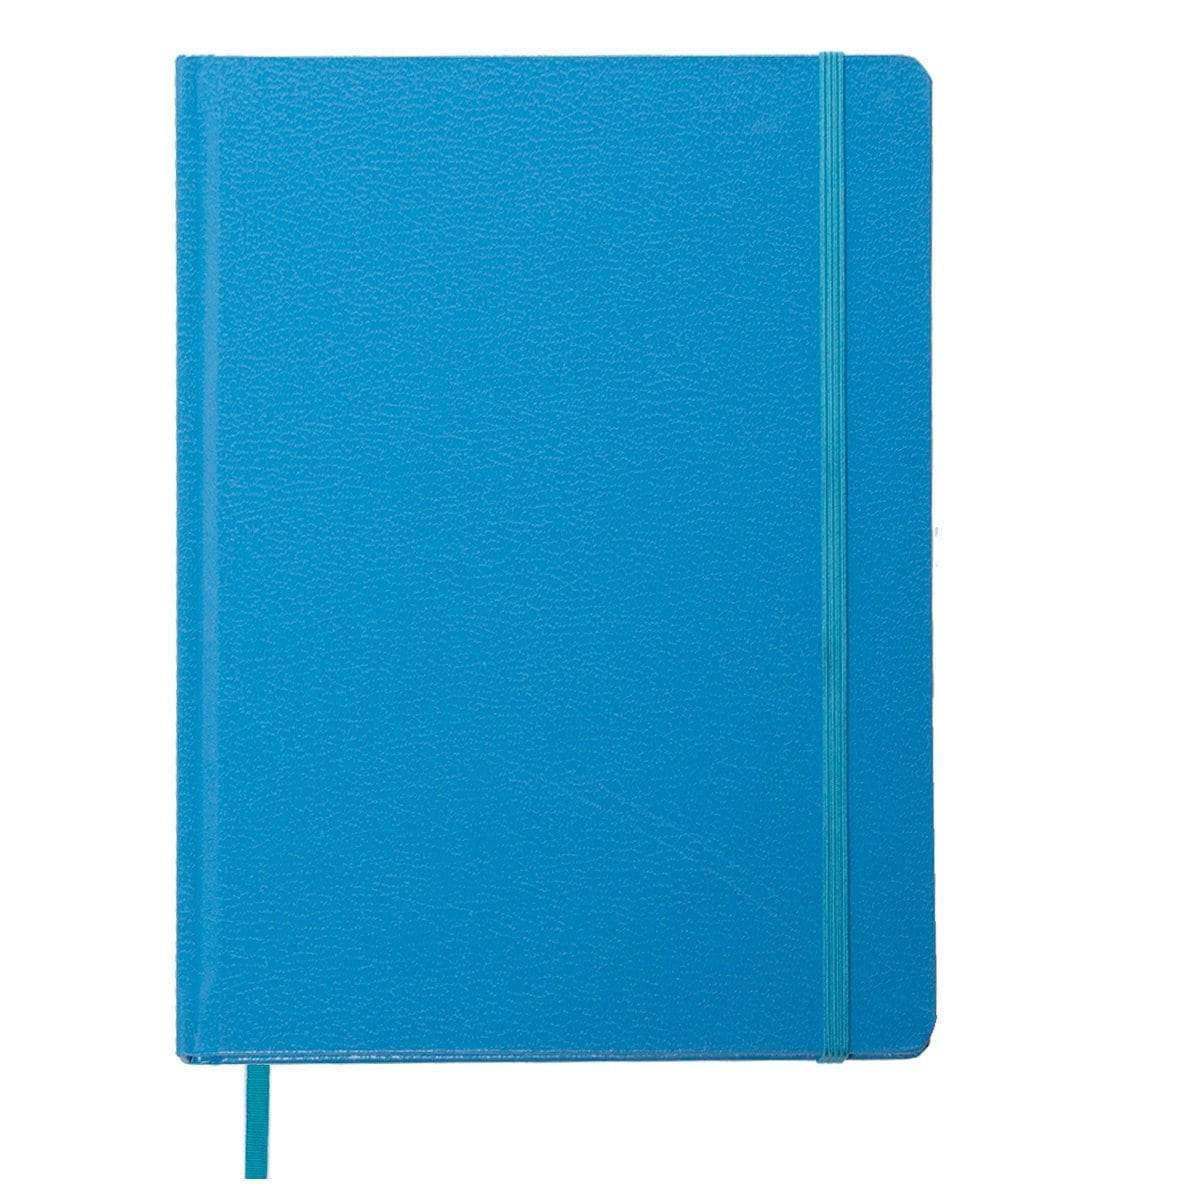 Results paper craft 16 pack 140pg 8 5 x 5 5 leatherette lined writing journals wide ruled banded notebook with ribbon bookmark light blue a5 size